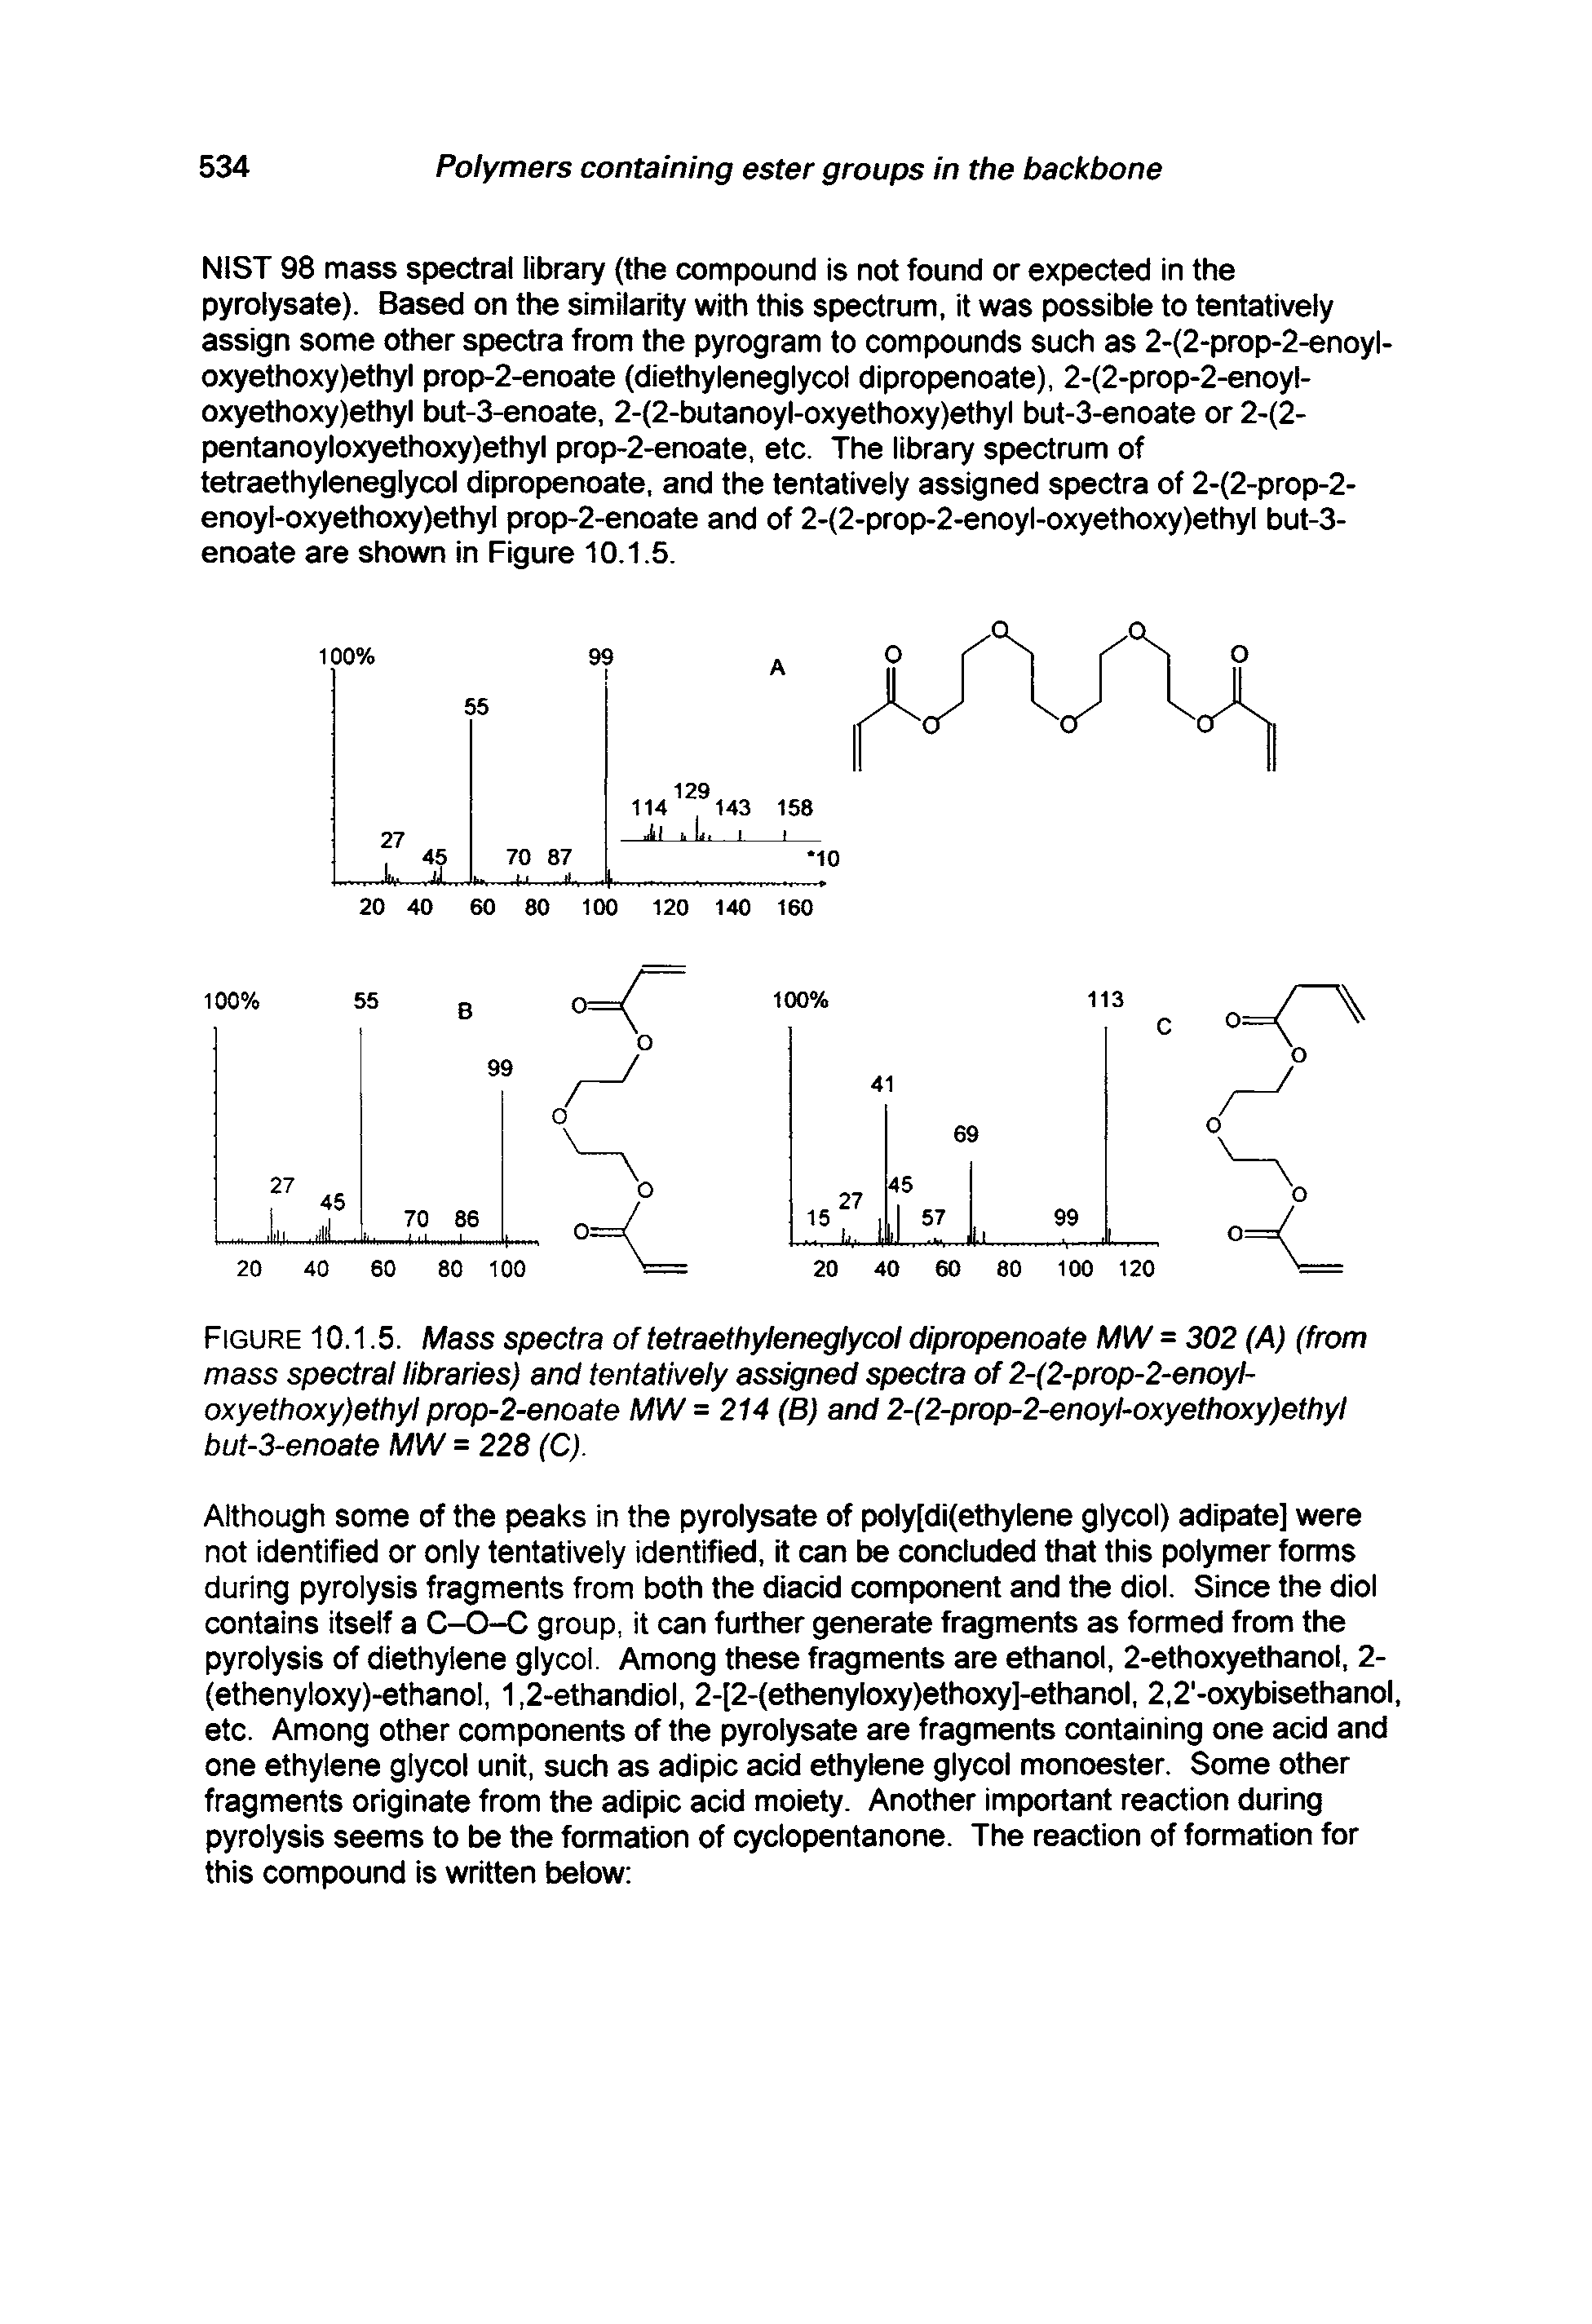 Figure 10.1.5. Mass spectra of tetraethyleneglycol dipropenoate MW = 302 (A) (from mass spectral libraries) and tentatively assigned spectra of 2-(2-prop-2-enoyl-oxyethoxy)ethyl prop-2-enoate MW =214 (B) and 2-(2-prop-2-enoyl-oxyethoxy)ethyl but-3-enoate MW = 228 (C).